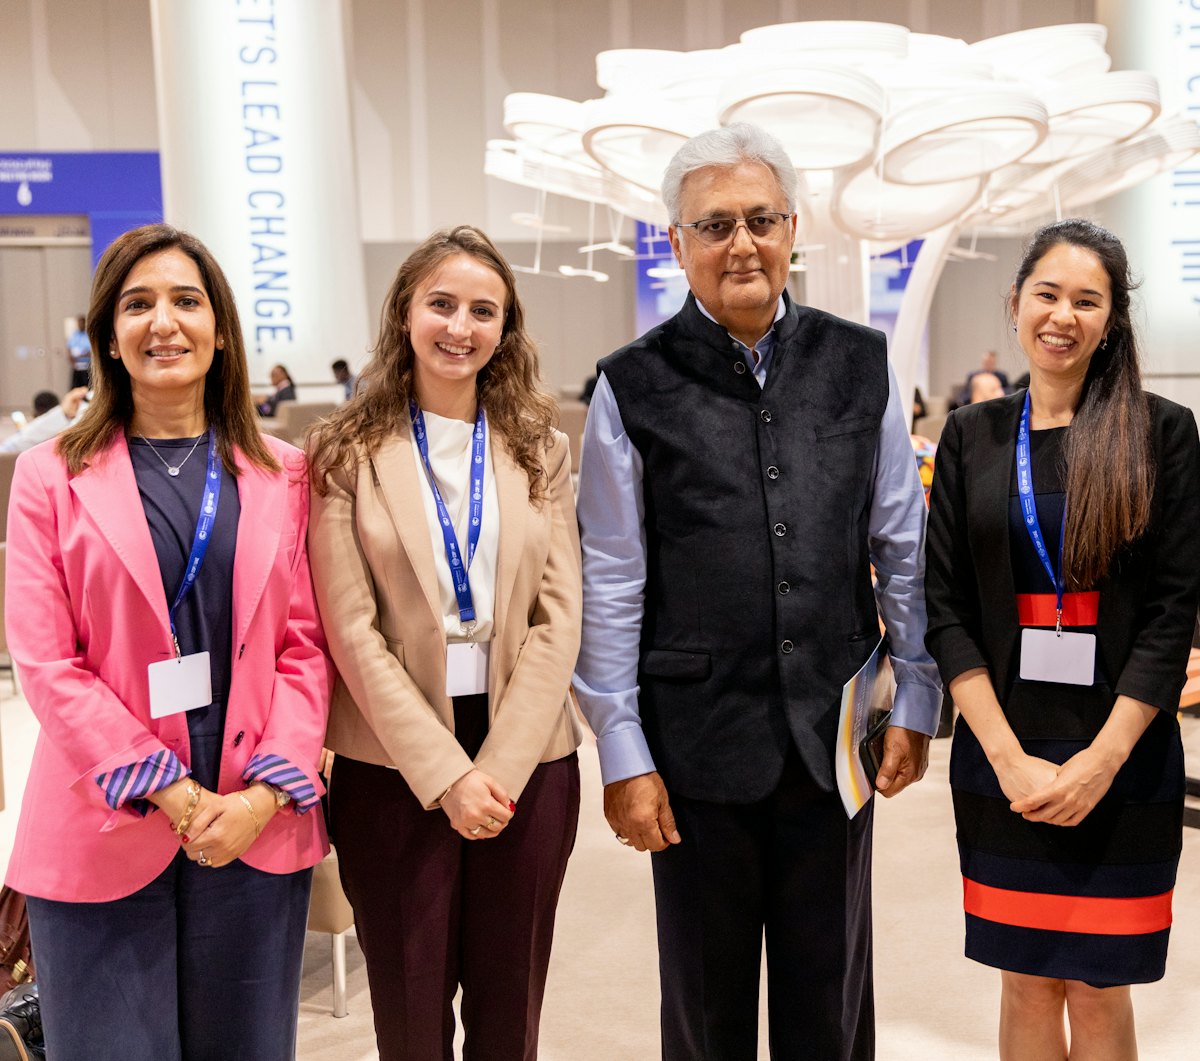 From left to right: Dr. Thabet from the Bahá’í Office of External Affairs in the UAE, Ms. Schirmeister from the BIC New York Office, Ovais Sarmad, the former UNFCCC Deputy Executive Secretary, who received a copy of the BIC statement One Planet, One Habitation, and Ms. Rameshfar also of the New York Office.